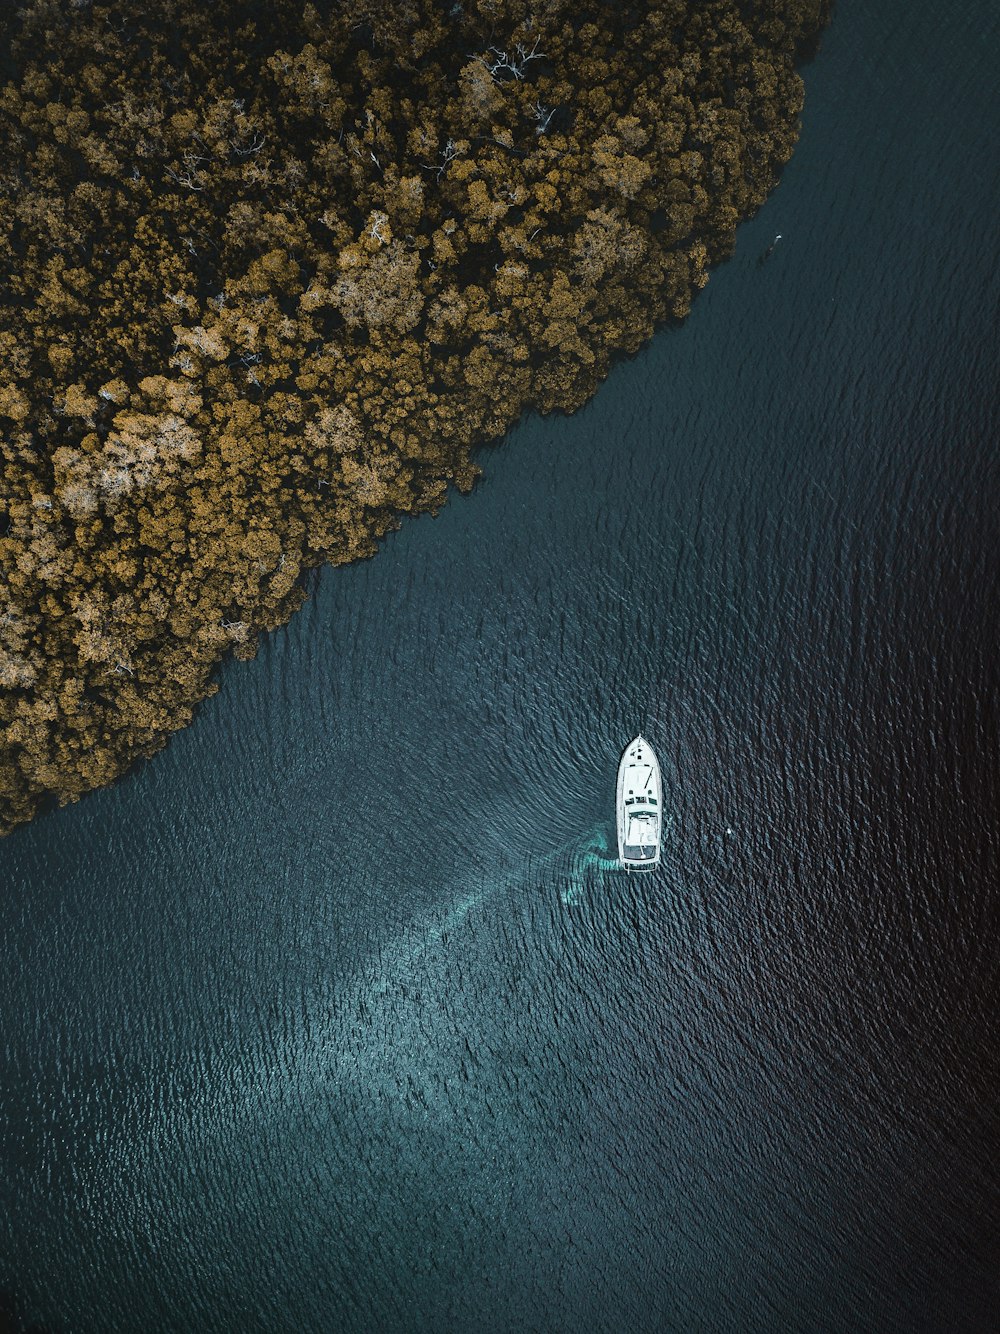 bird's-eye view of boat on body of water